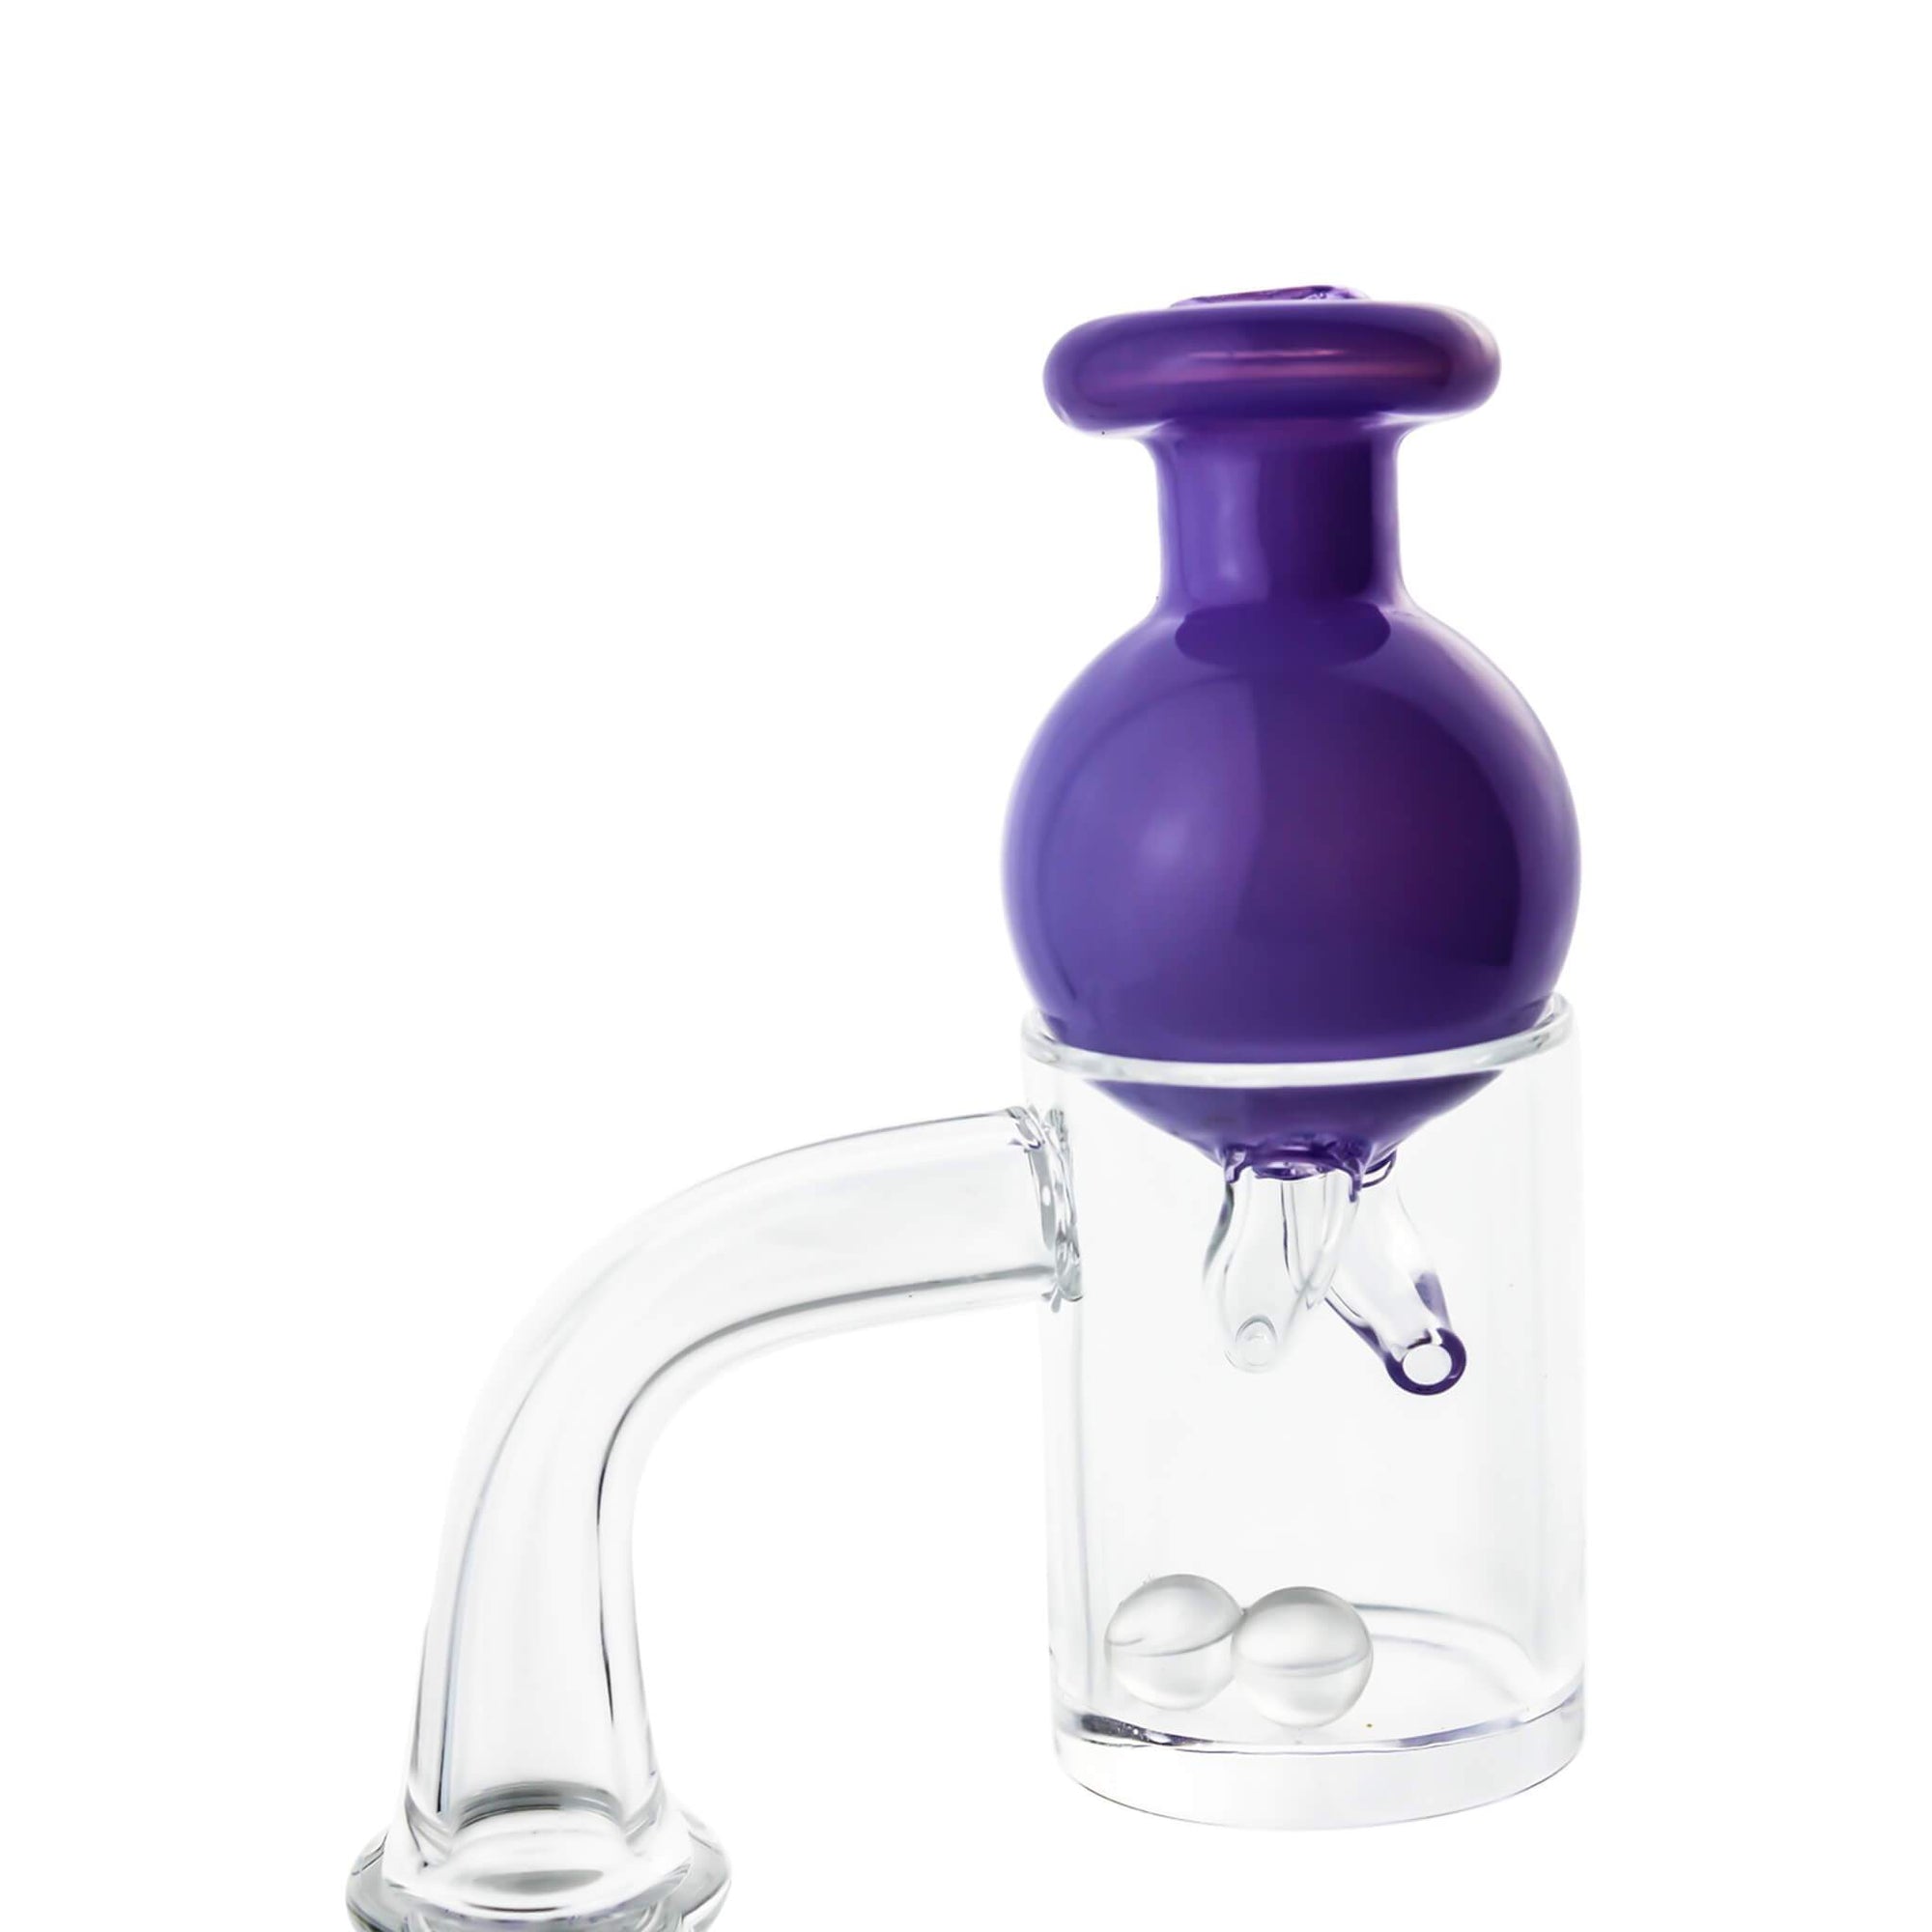 Dual Nozzle Directional Bubble Carb Cap | In Use View | the dabbing specialists